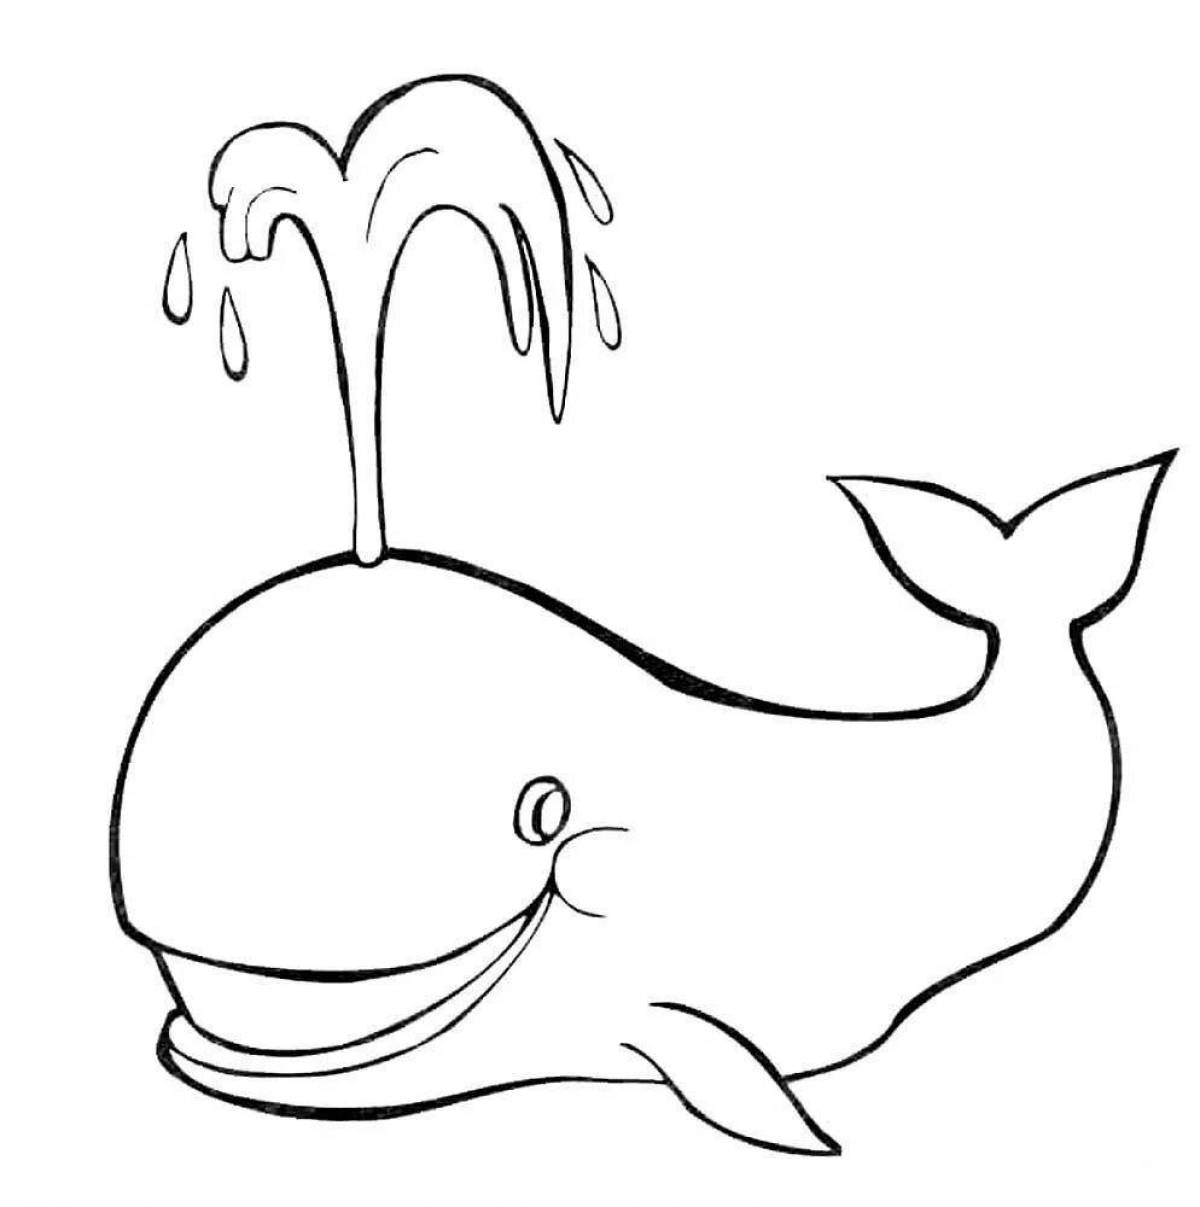 Violent coloring drawing of a whale